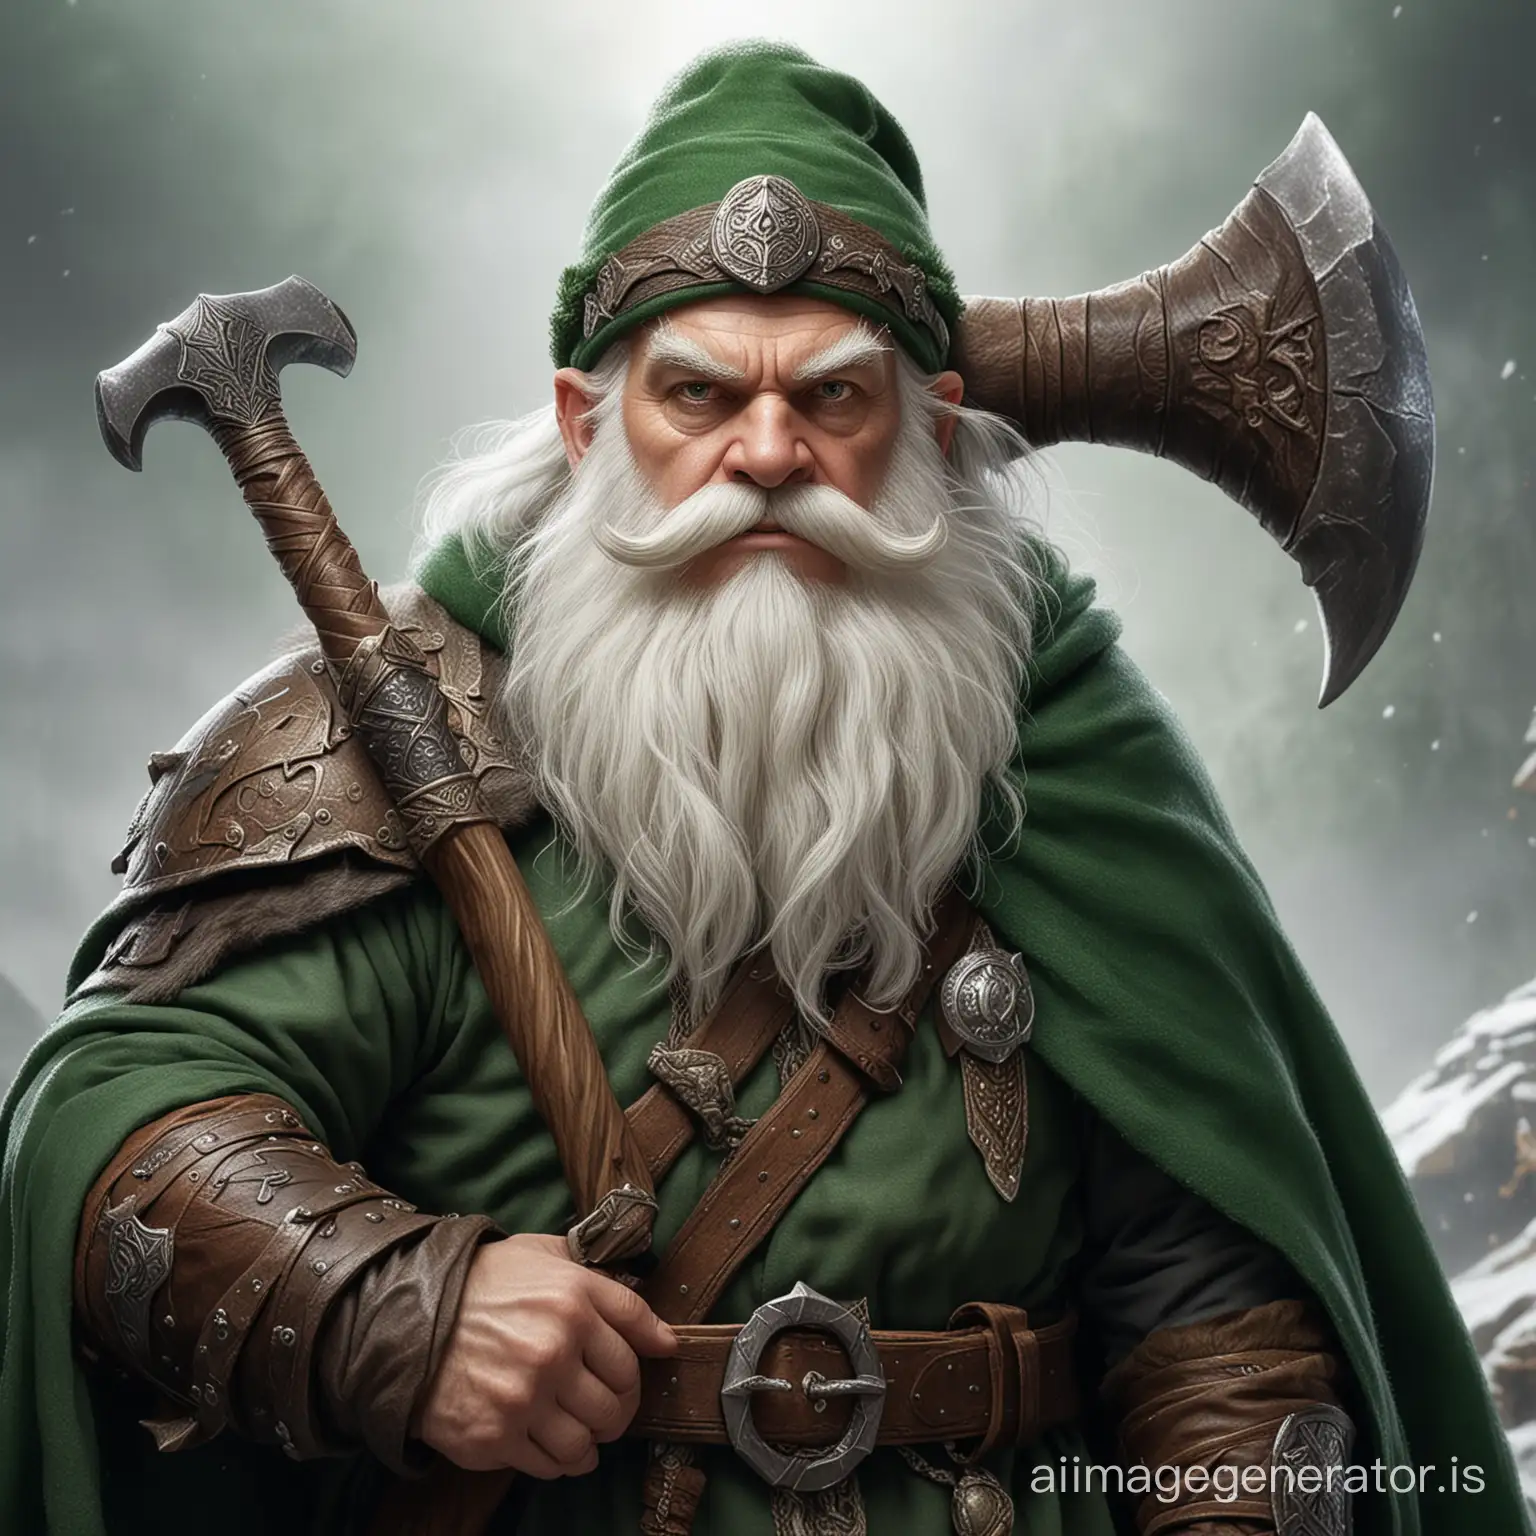 Large dwarf with a white beard holding a big axe over his shoulder. He wears a green hat and a green cape. He looks like from a serious fantasy movie.